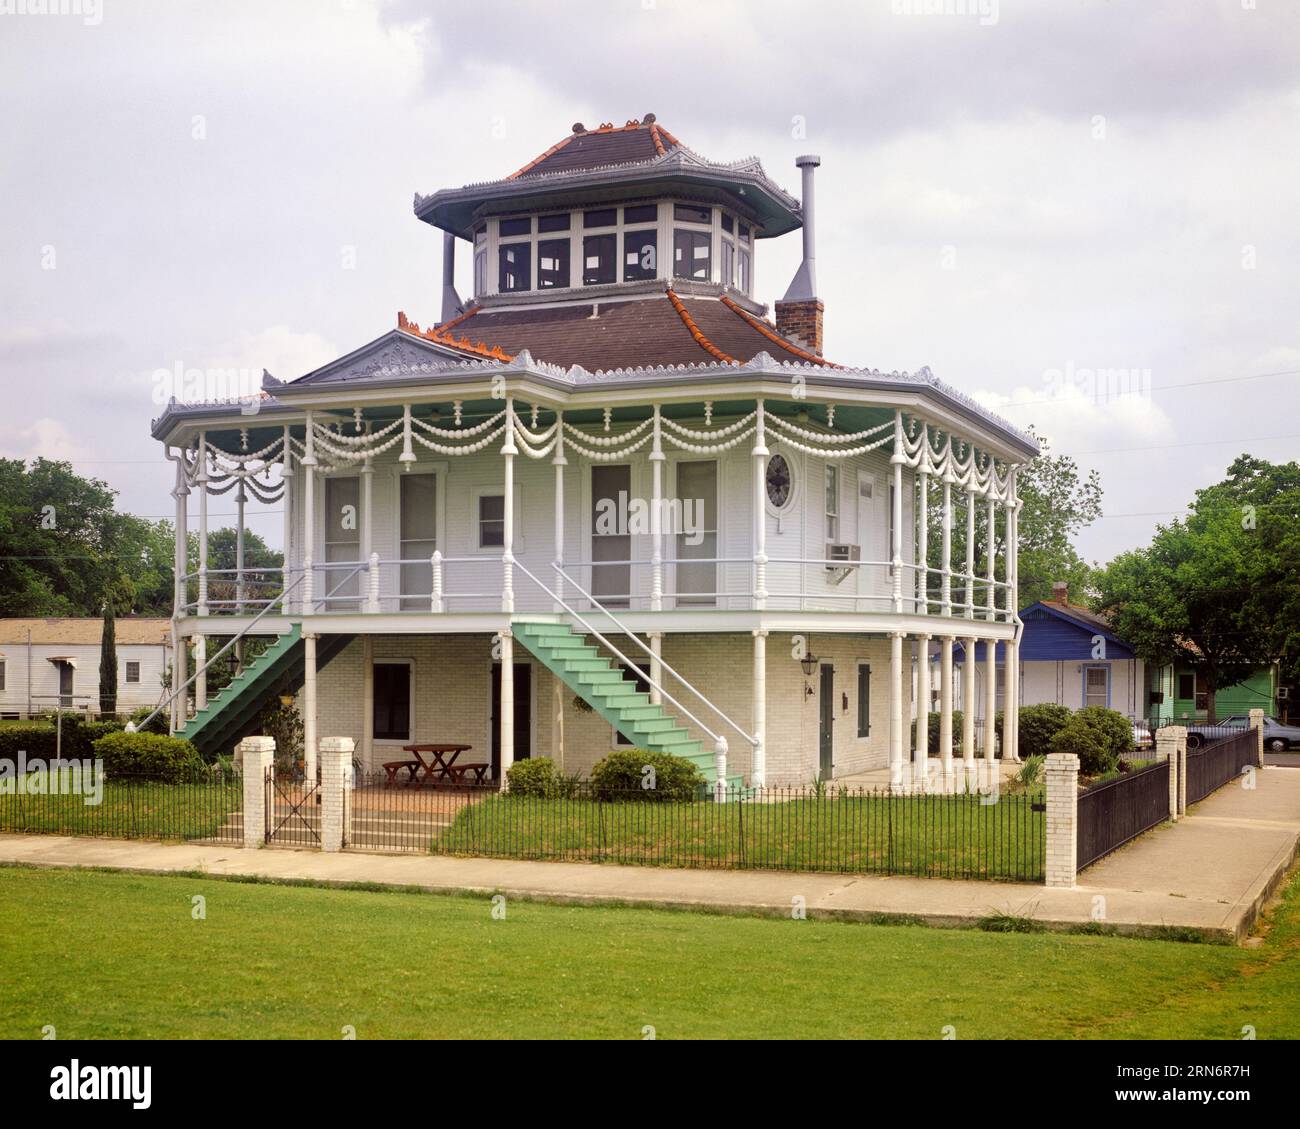 1980s ONE OF THE 2 DOULLUT STEAMBOAT HOUSES ON EGANIA STREET IN 1905 BY RIVERBOAT CAPTAINS MARY AND MARTIN IN NEW ORLEANS LA USA - kr40599 GRD001 HARS RIVERBOAT CHIMNEY DEEP SOUTH LA MISSISSIPPI RIVER NEW ORLEANS OLD FASHIONED STEAMBOAT Stock Photo